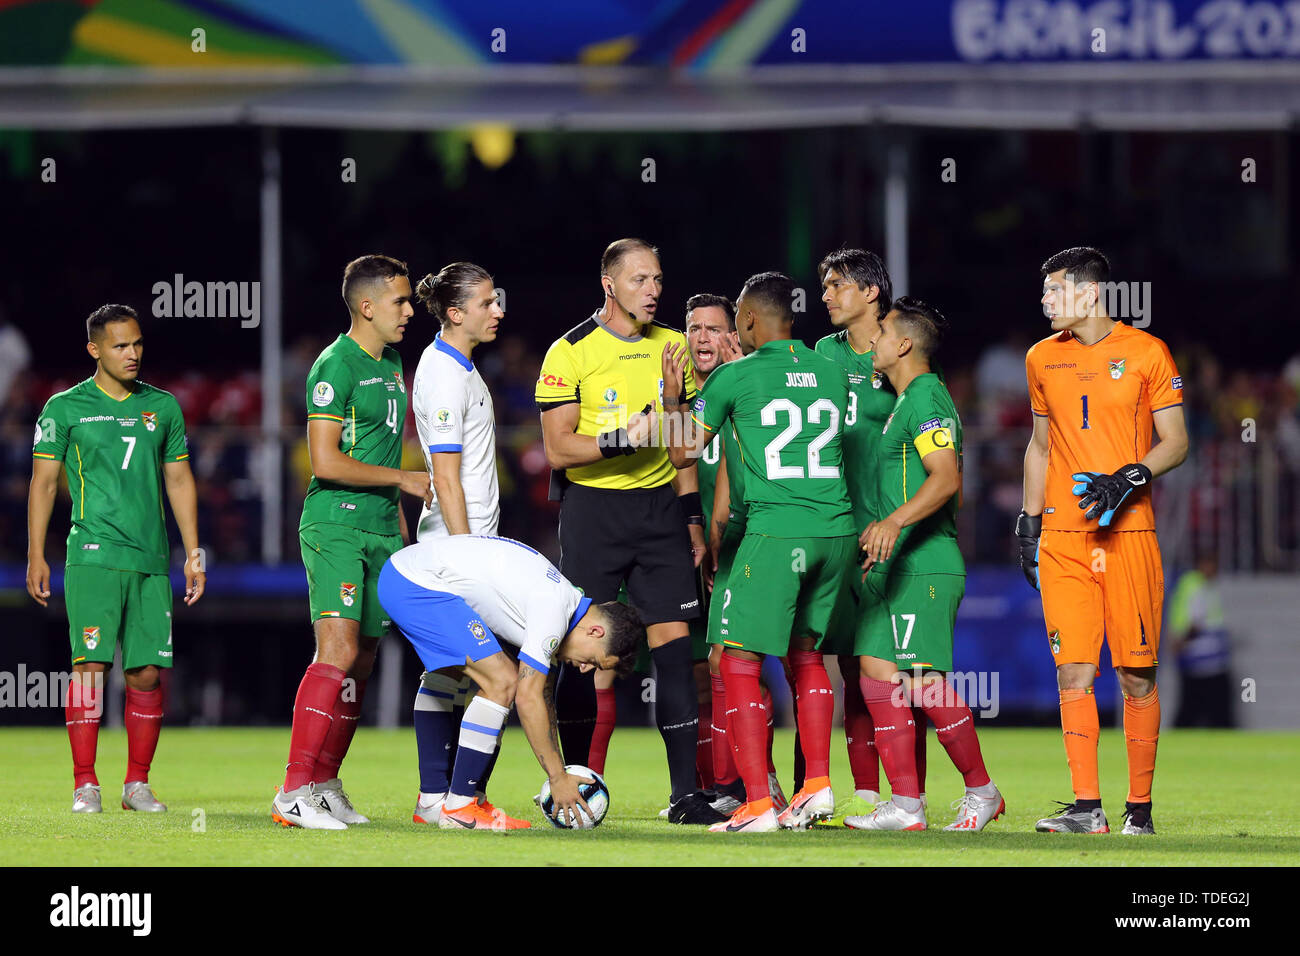 Sao Paulo, Brazil. 14th June, 2019. Nestor Pitana (Referee) after he awarded a penalty kick to Brazil after checking the VAR, June 14, 2019 - Football/Soccer : Copa America 2019, Group A match between Brasil 3-0 Bolivia at Morumbi stadium in Sao Paulo, Brazil. Credit: AFLO/Alamy Live News Stock Photo